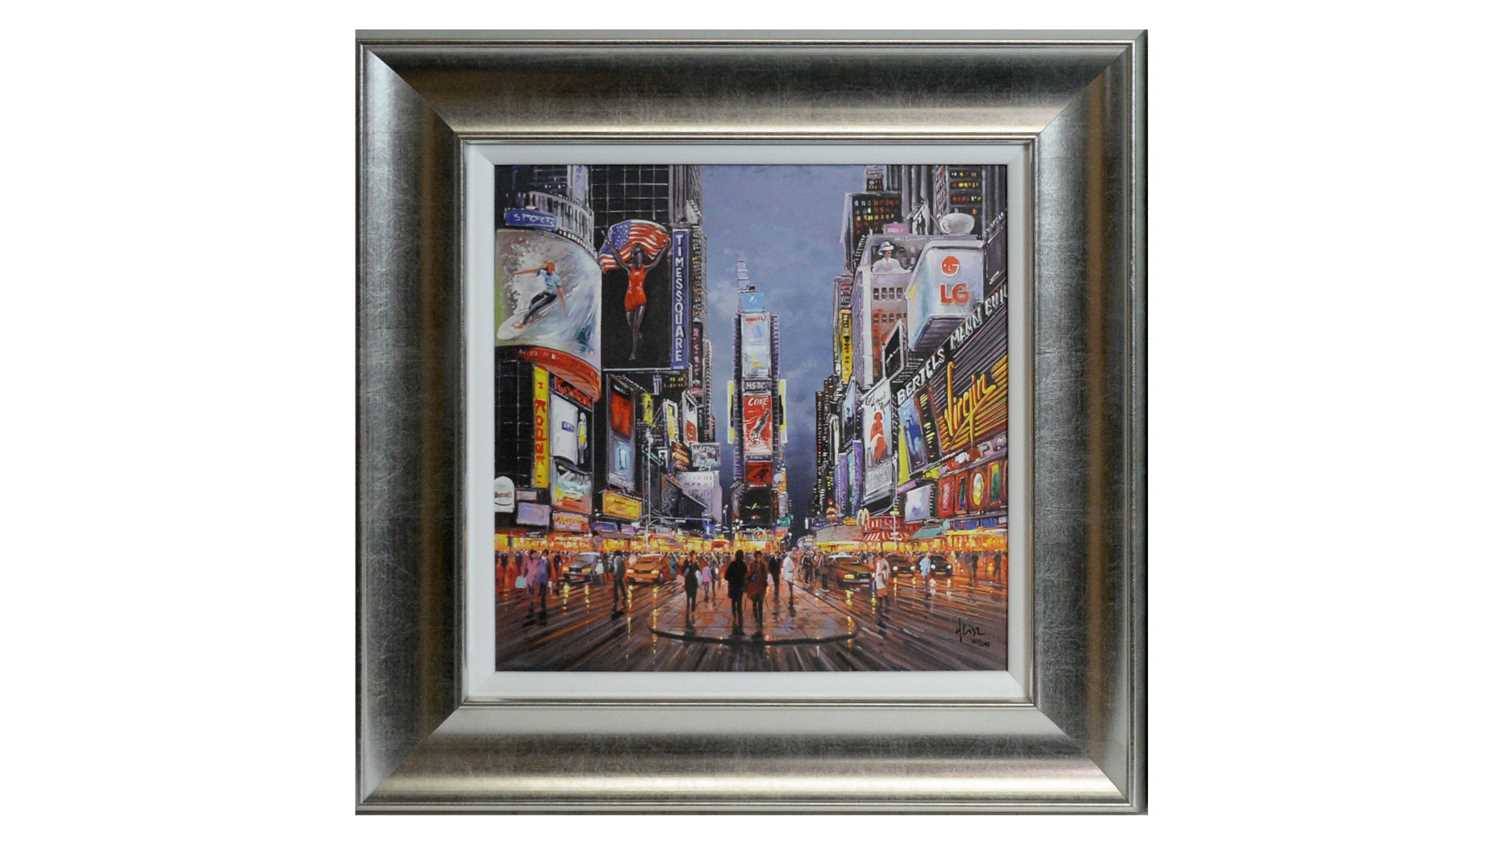 Lot 5 - Henderson Cisz - After Dark, Times Square | limited edition embellished canvas print